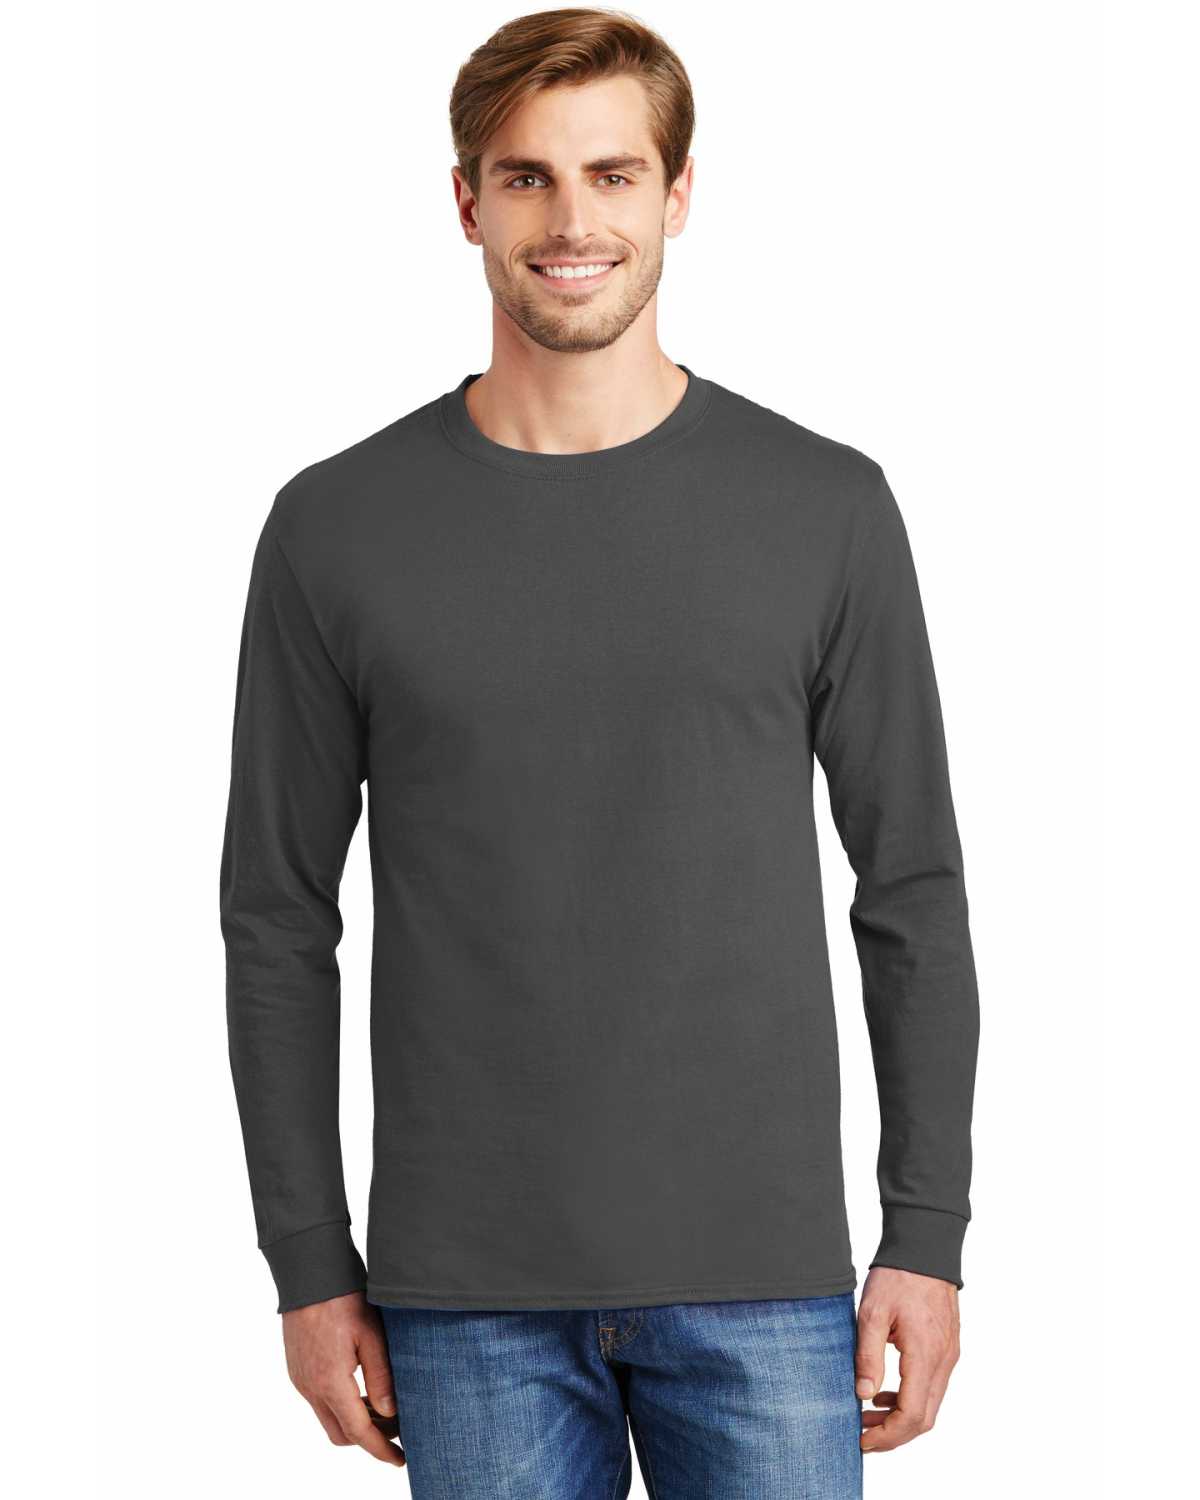 Hanes 5586 Tagless 100% Cotton Long Sleeve T-Shirt on discount ...